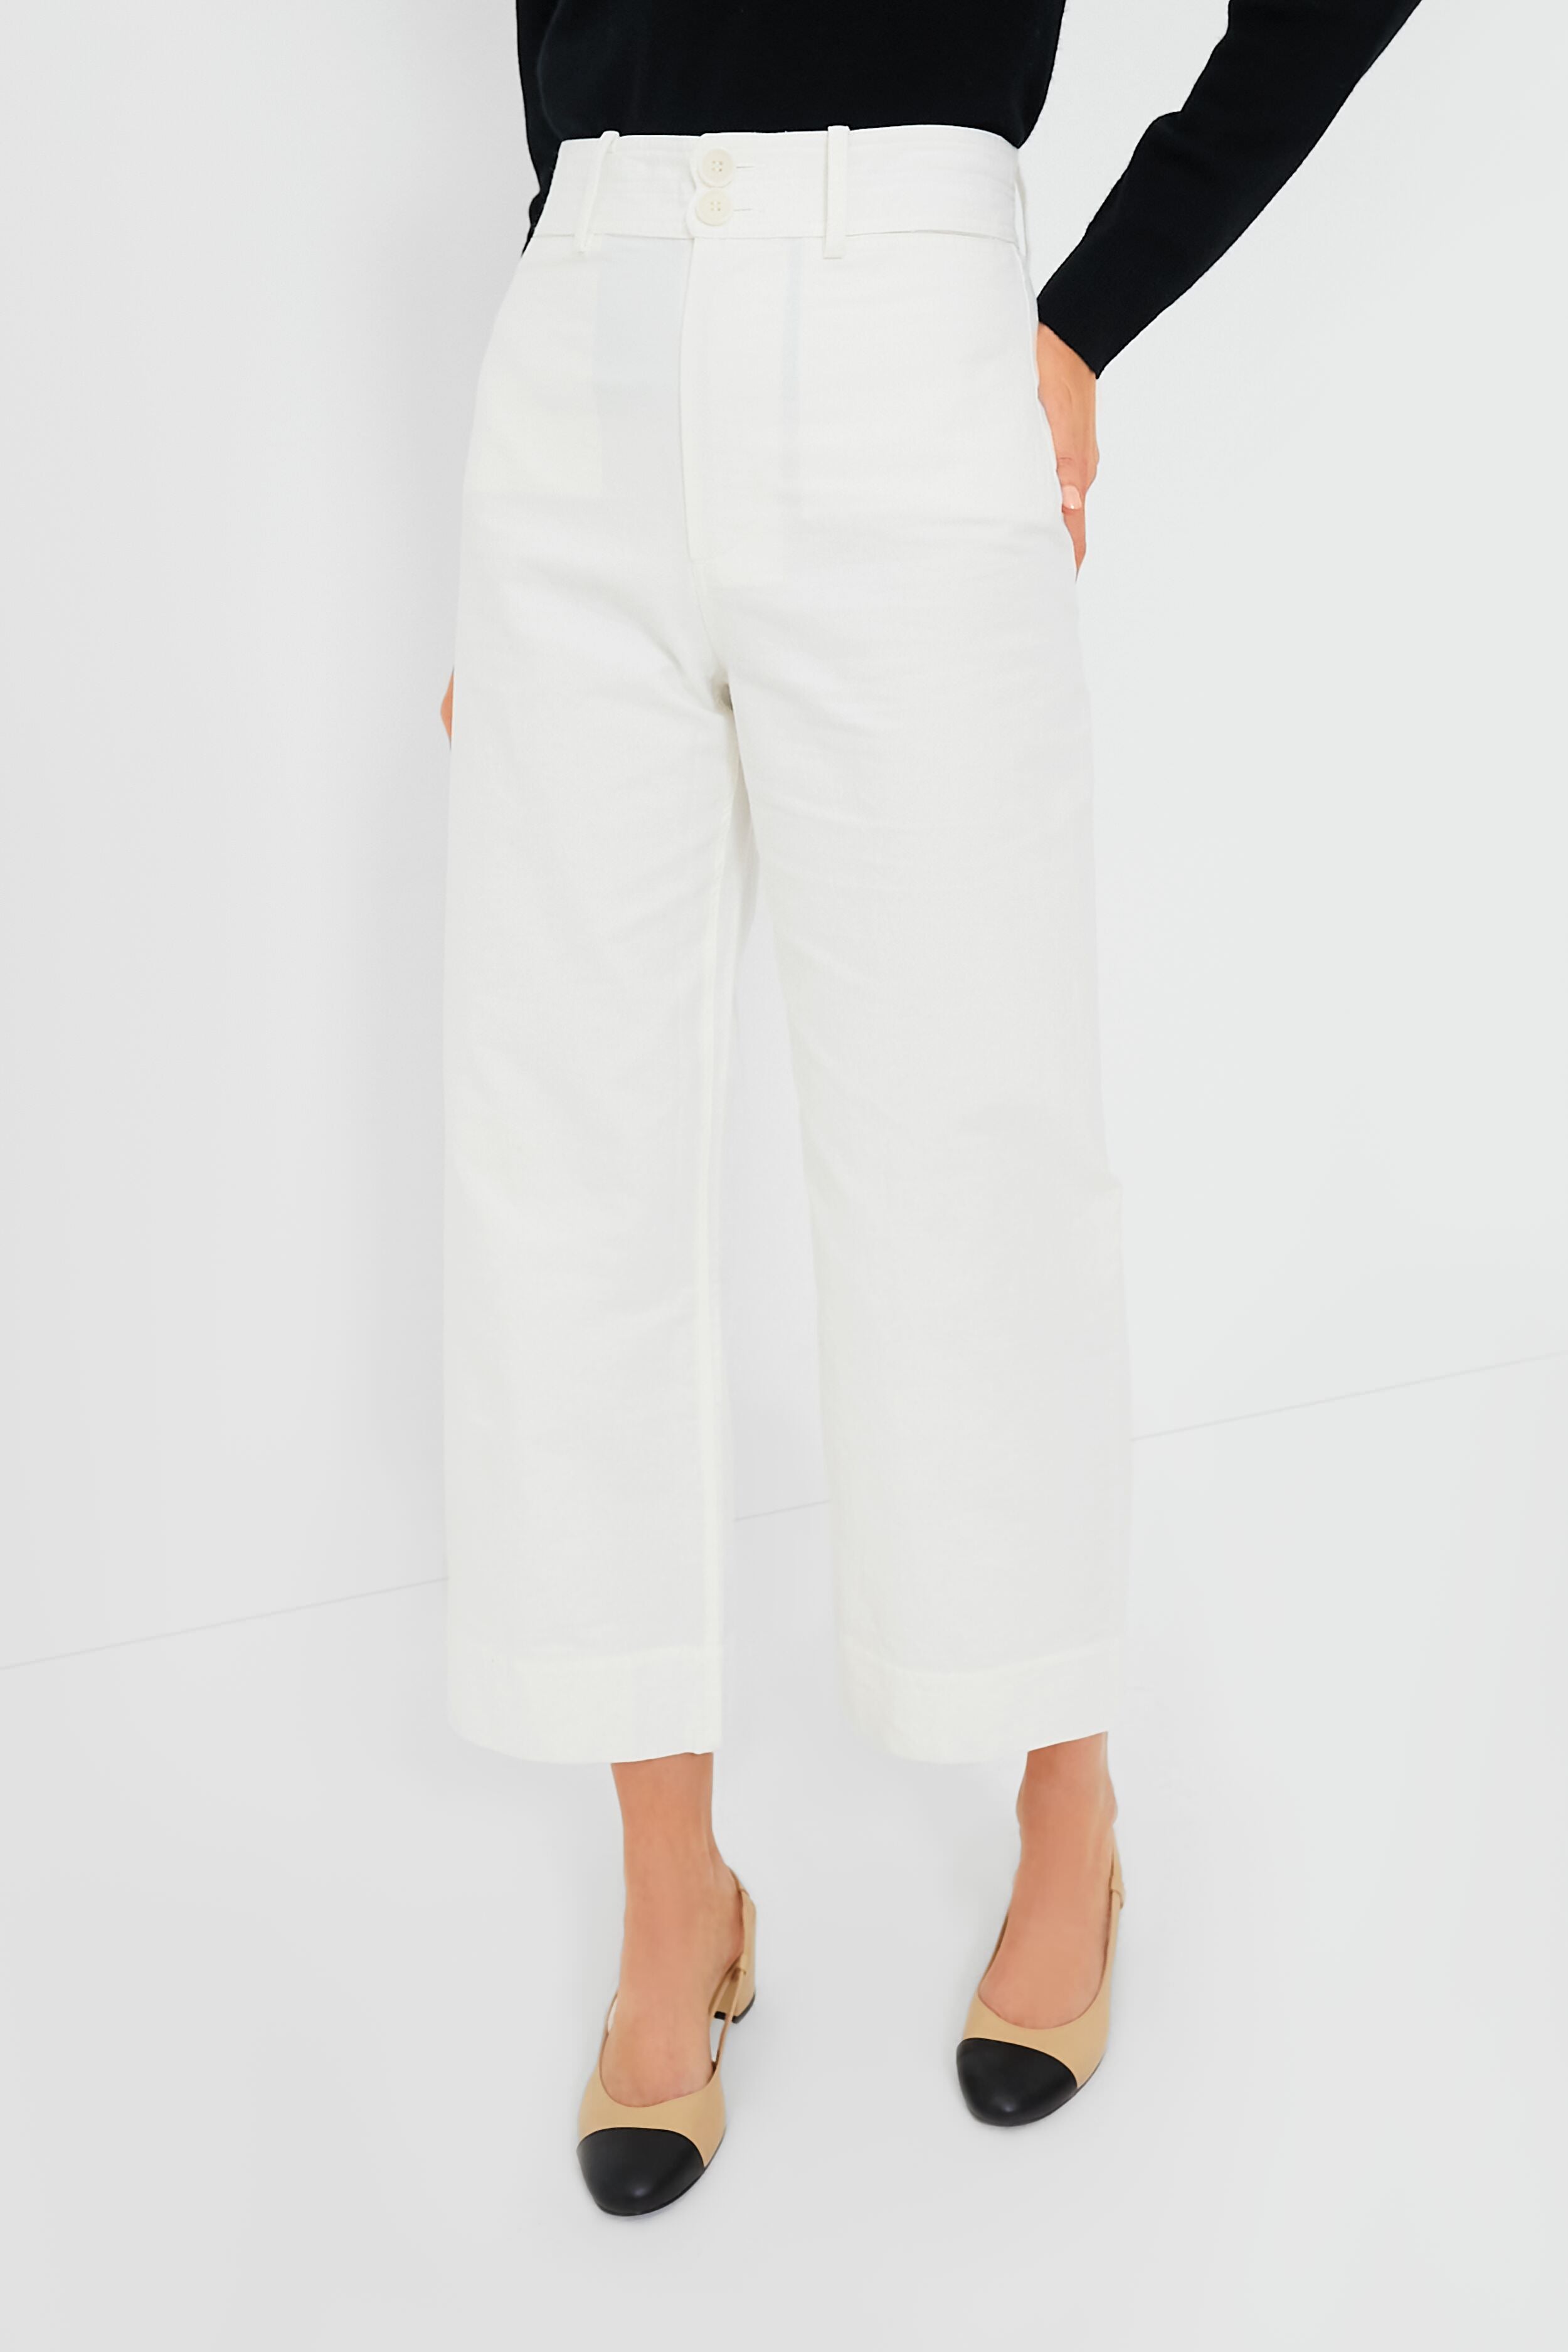 Linen Blend Cropped Pant | Seed Heritage